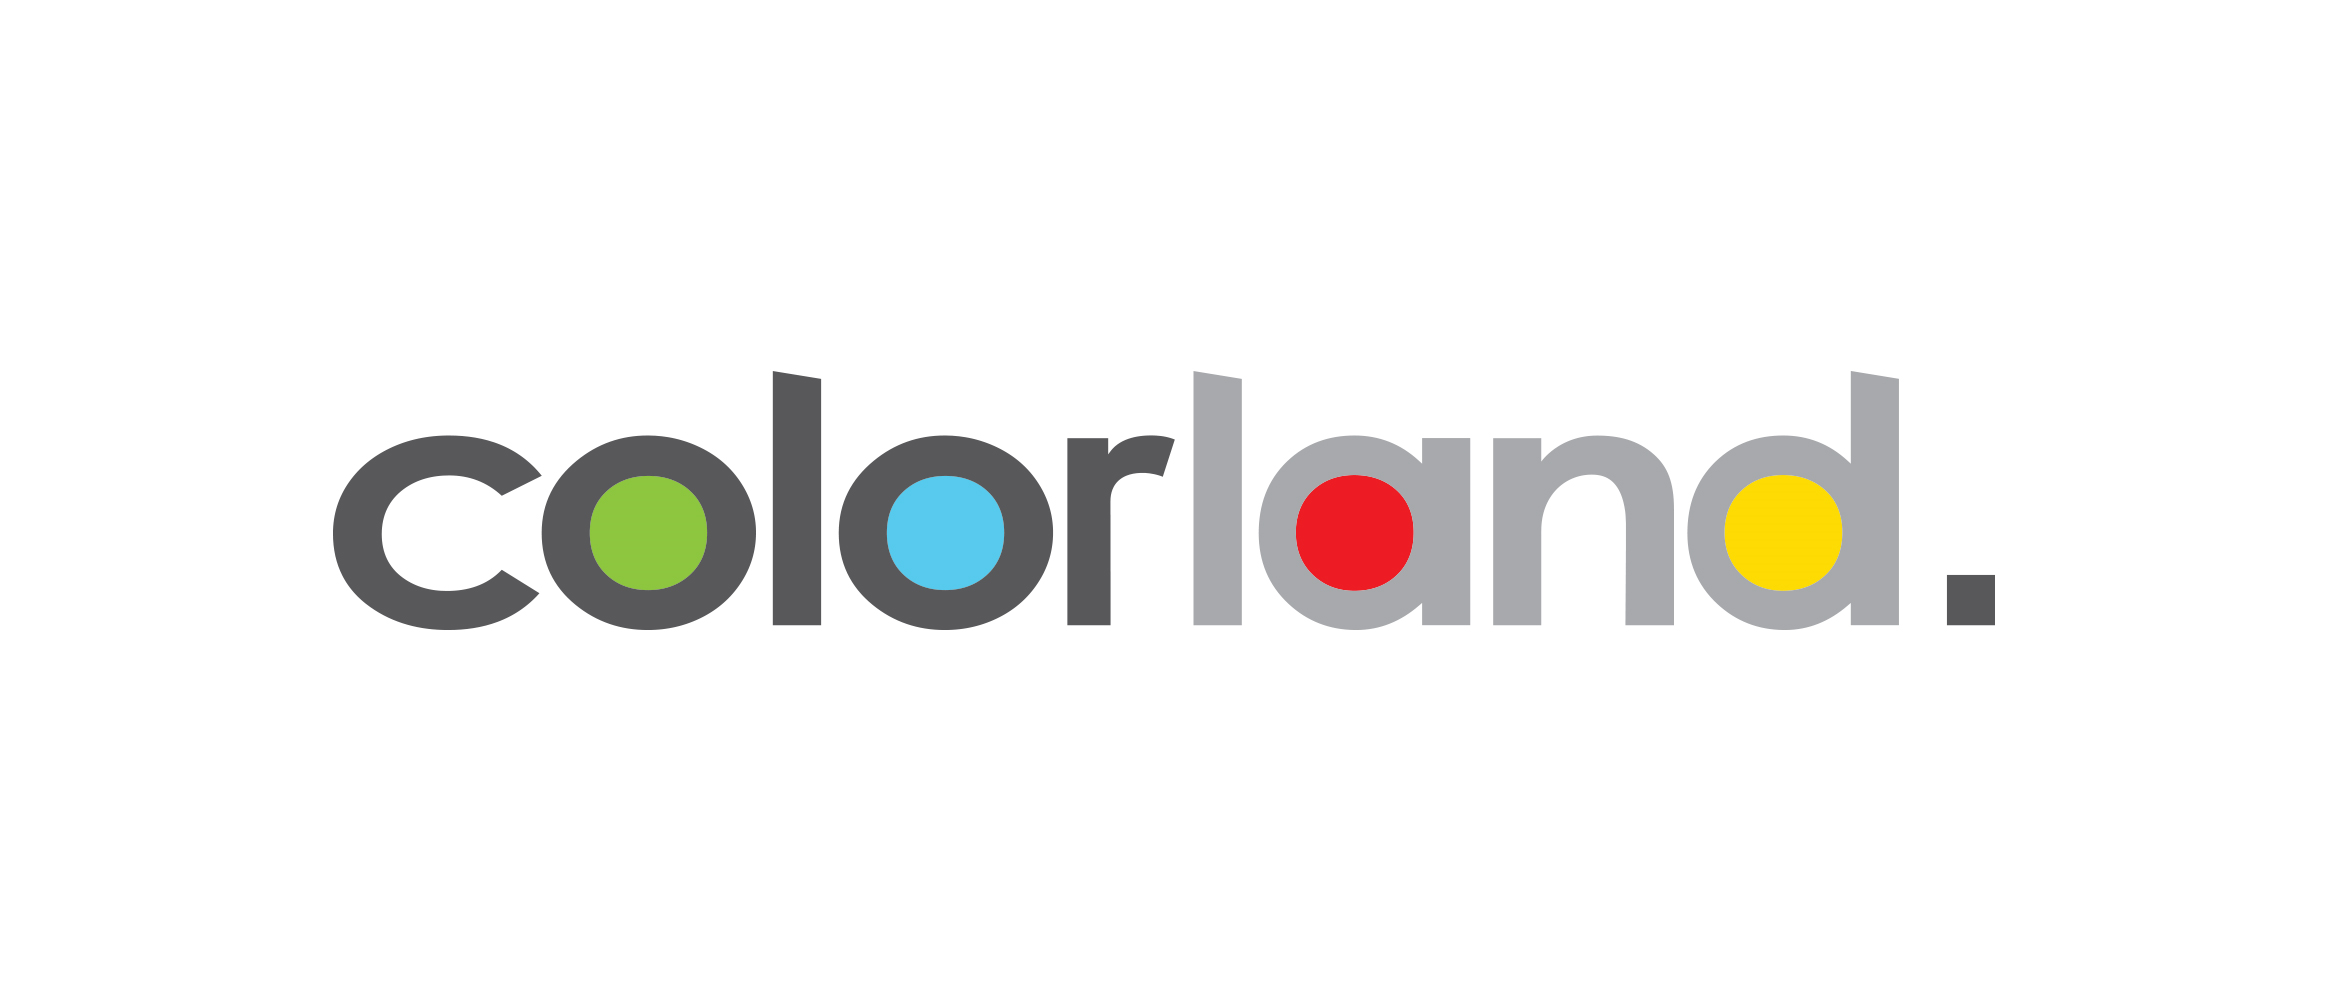 Colorland